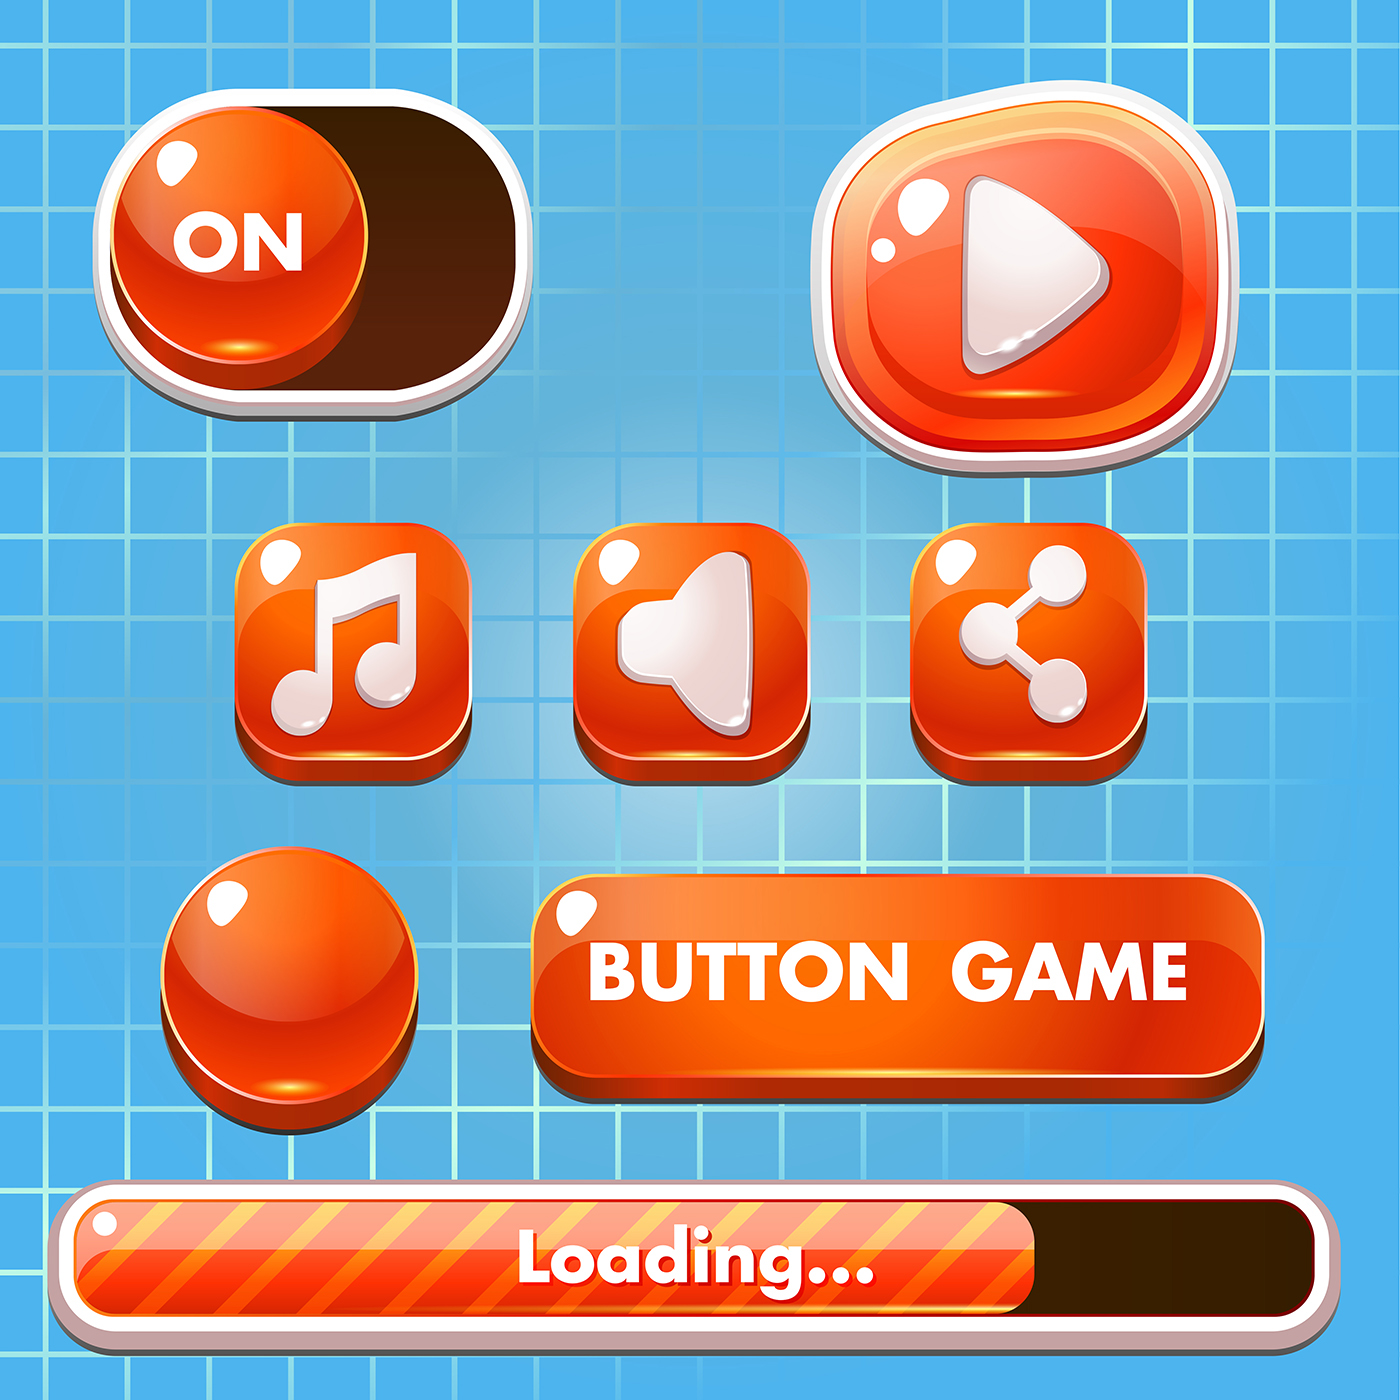 UI ux button game cartoon play system button music icon Icon share